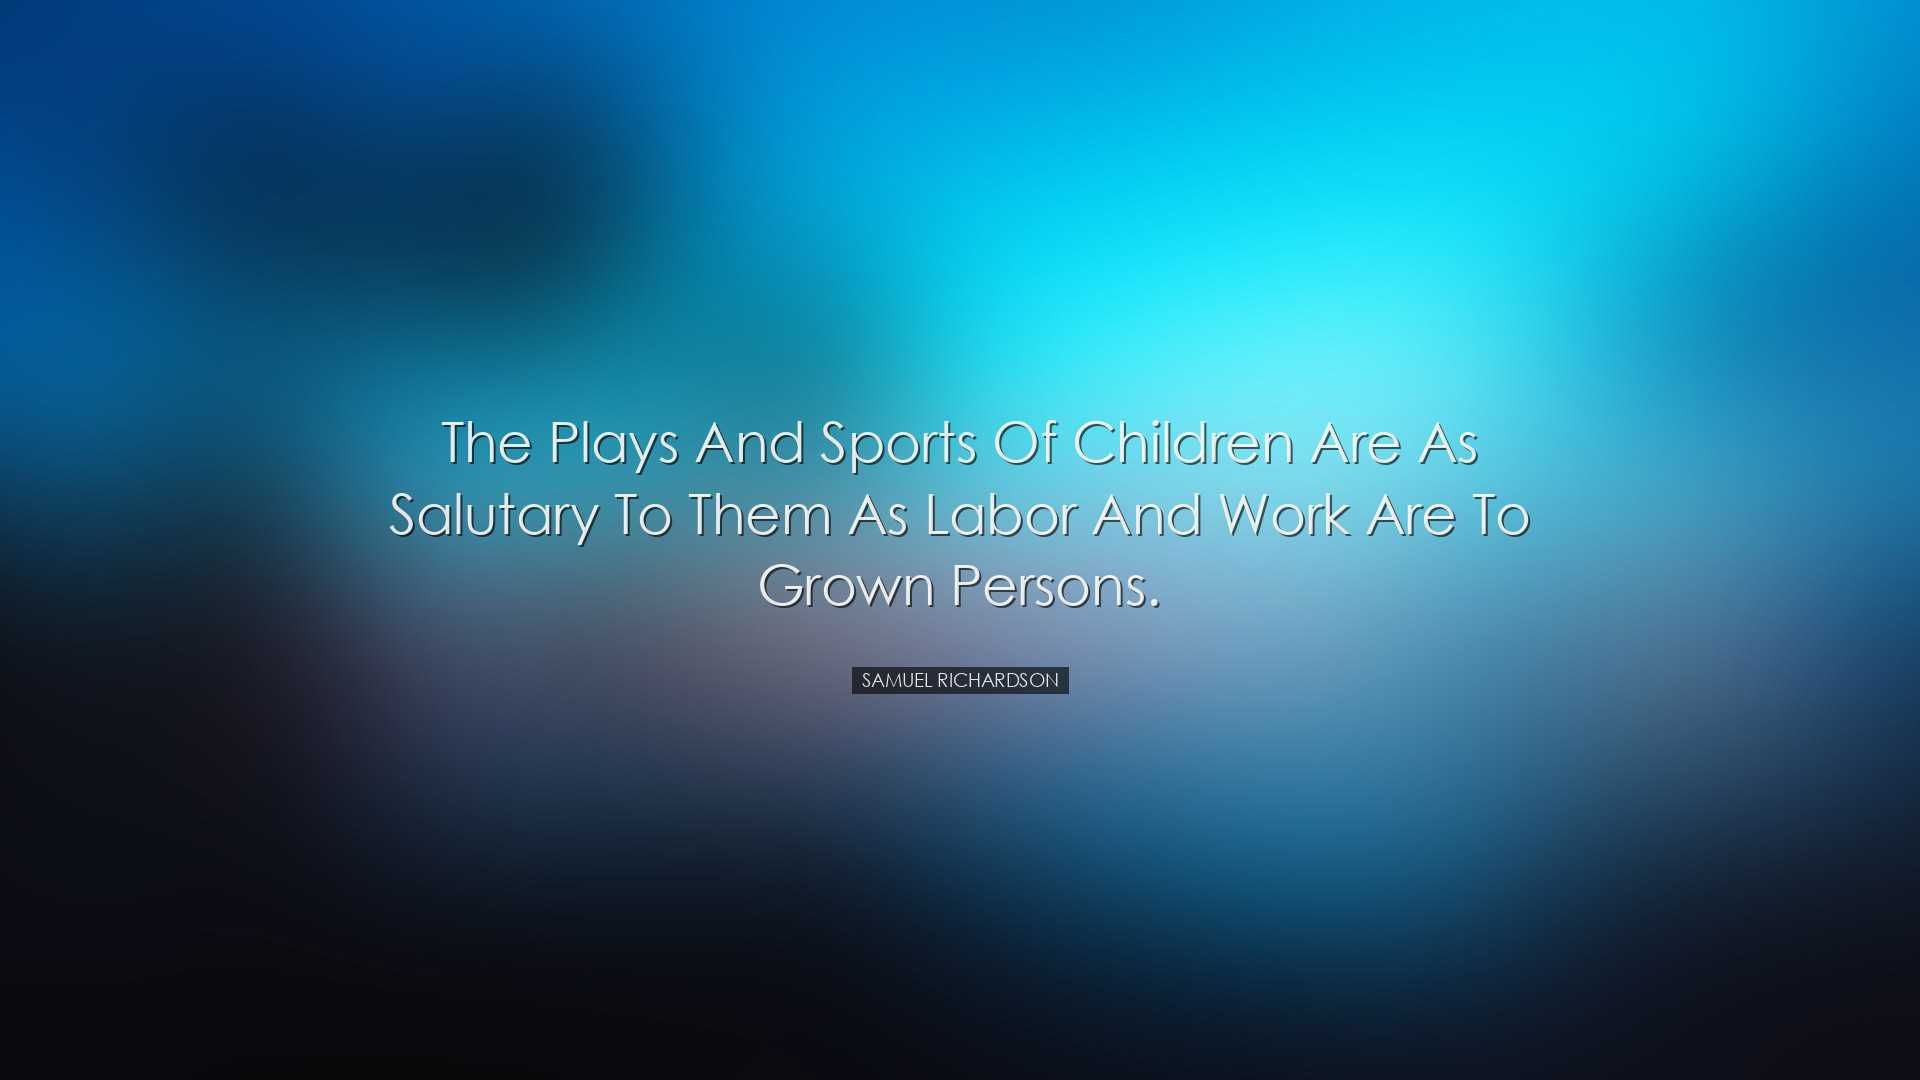 The plays and sports of children are as salutary to them as labor